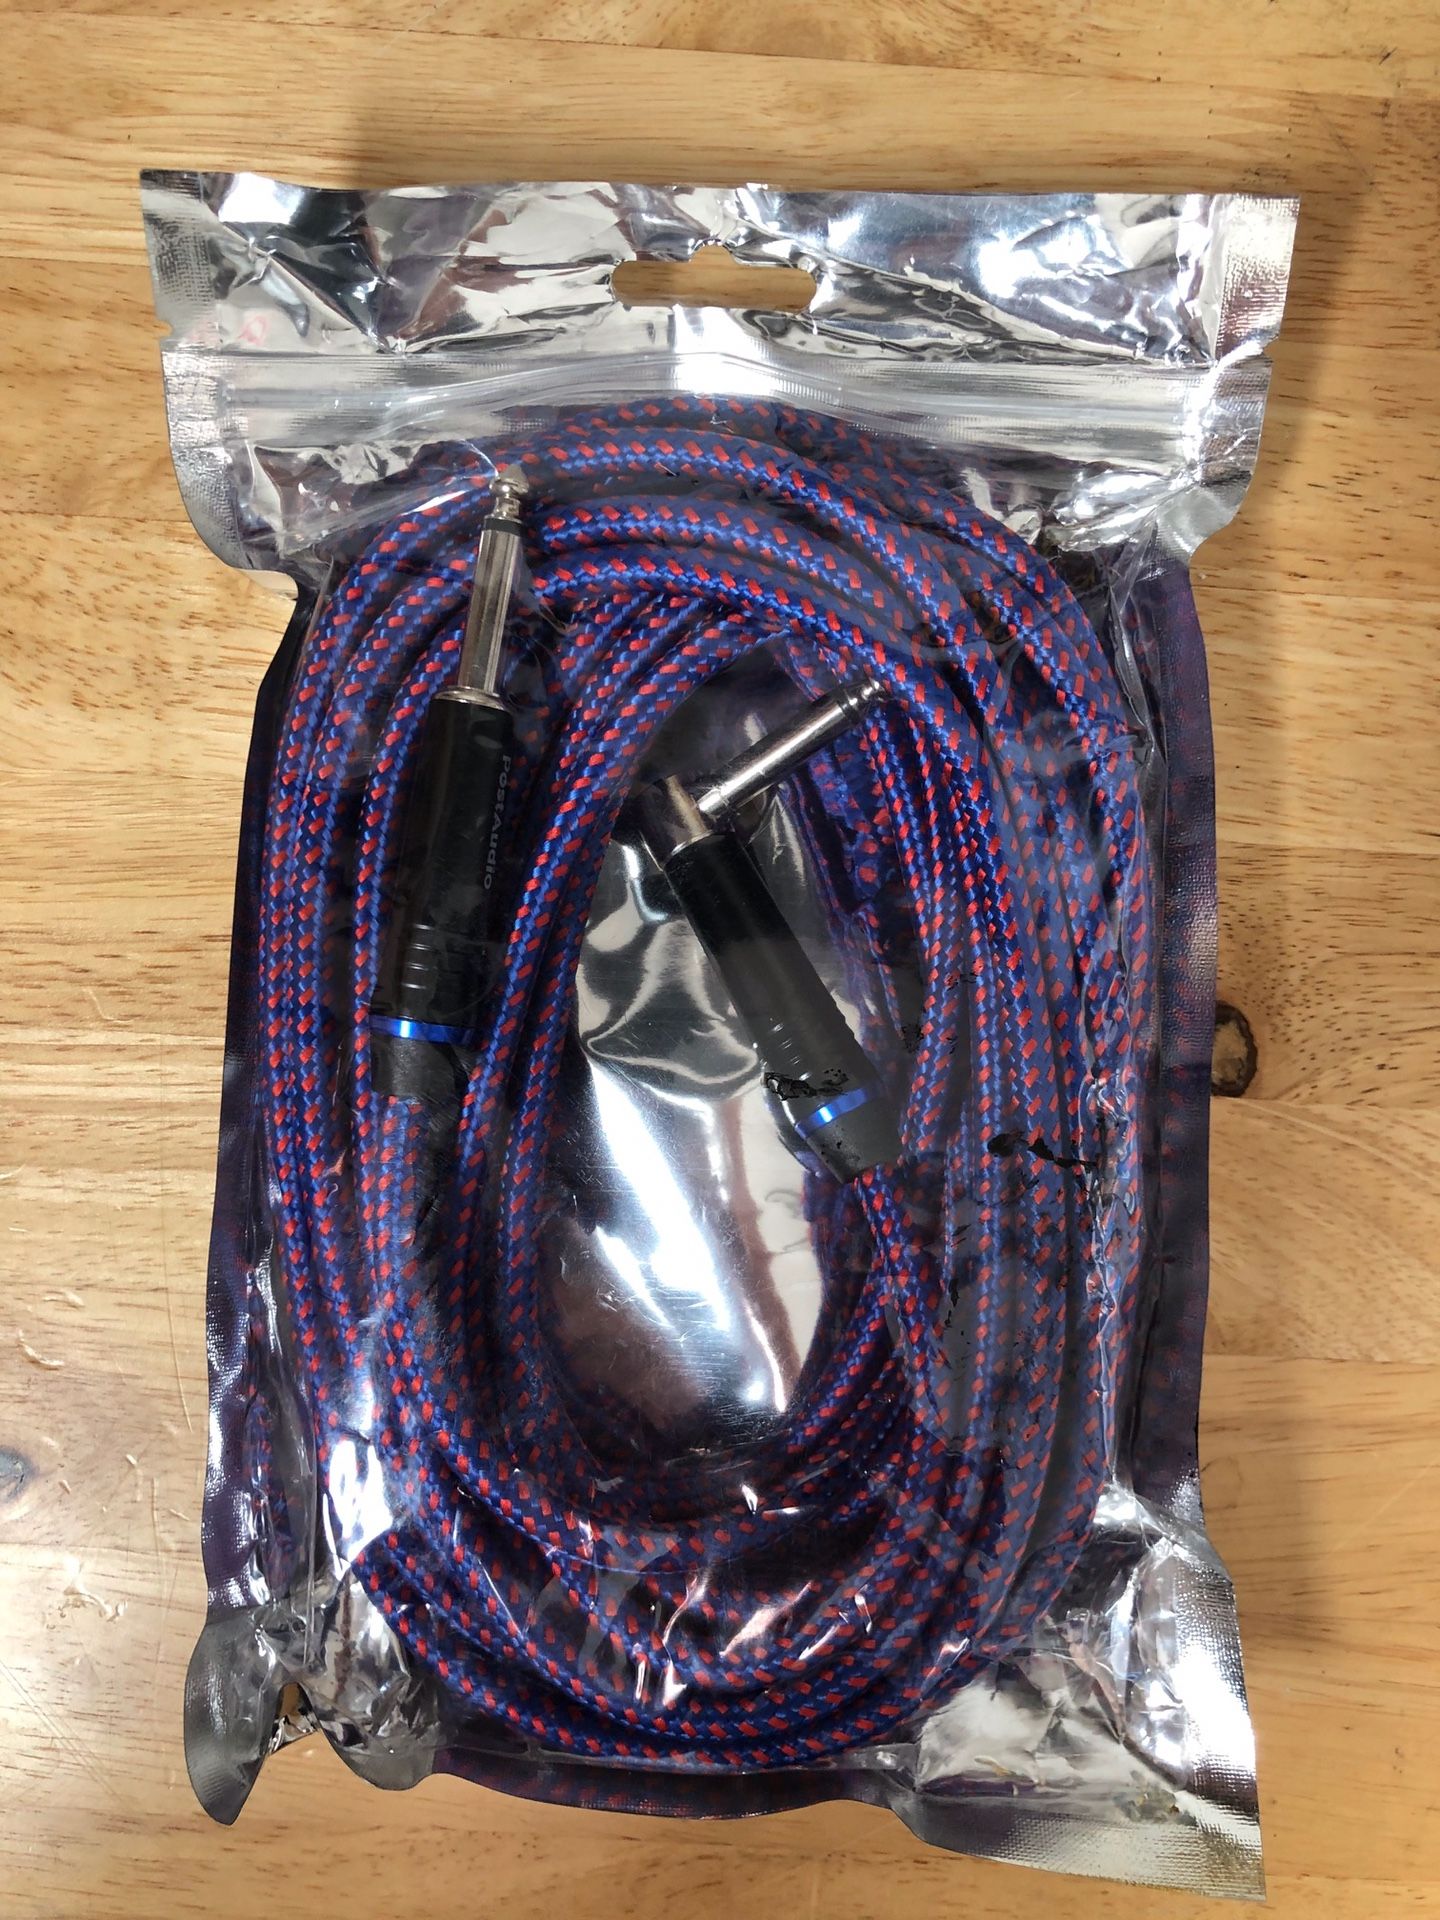 20 ft Right-Angle cable heavy duty professional quality, for Electric Guitars, Musical/Audio Instruments brand new Fender, Squier, bass, amp, effects